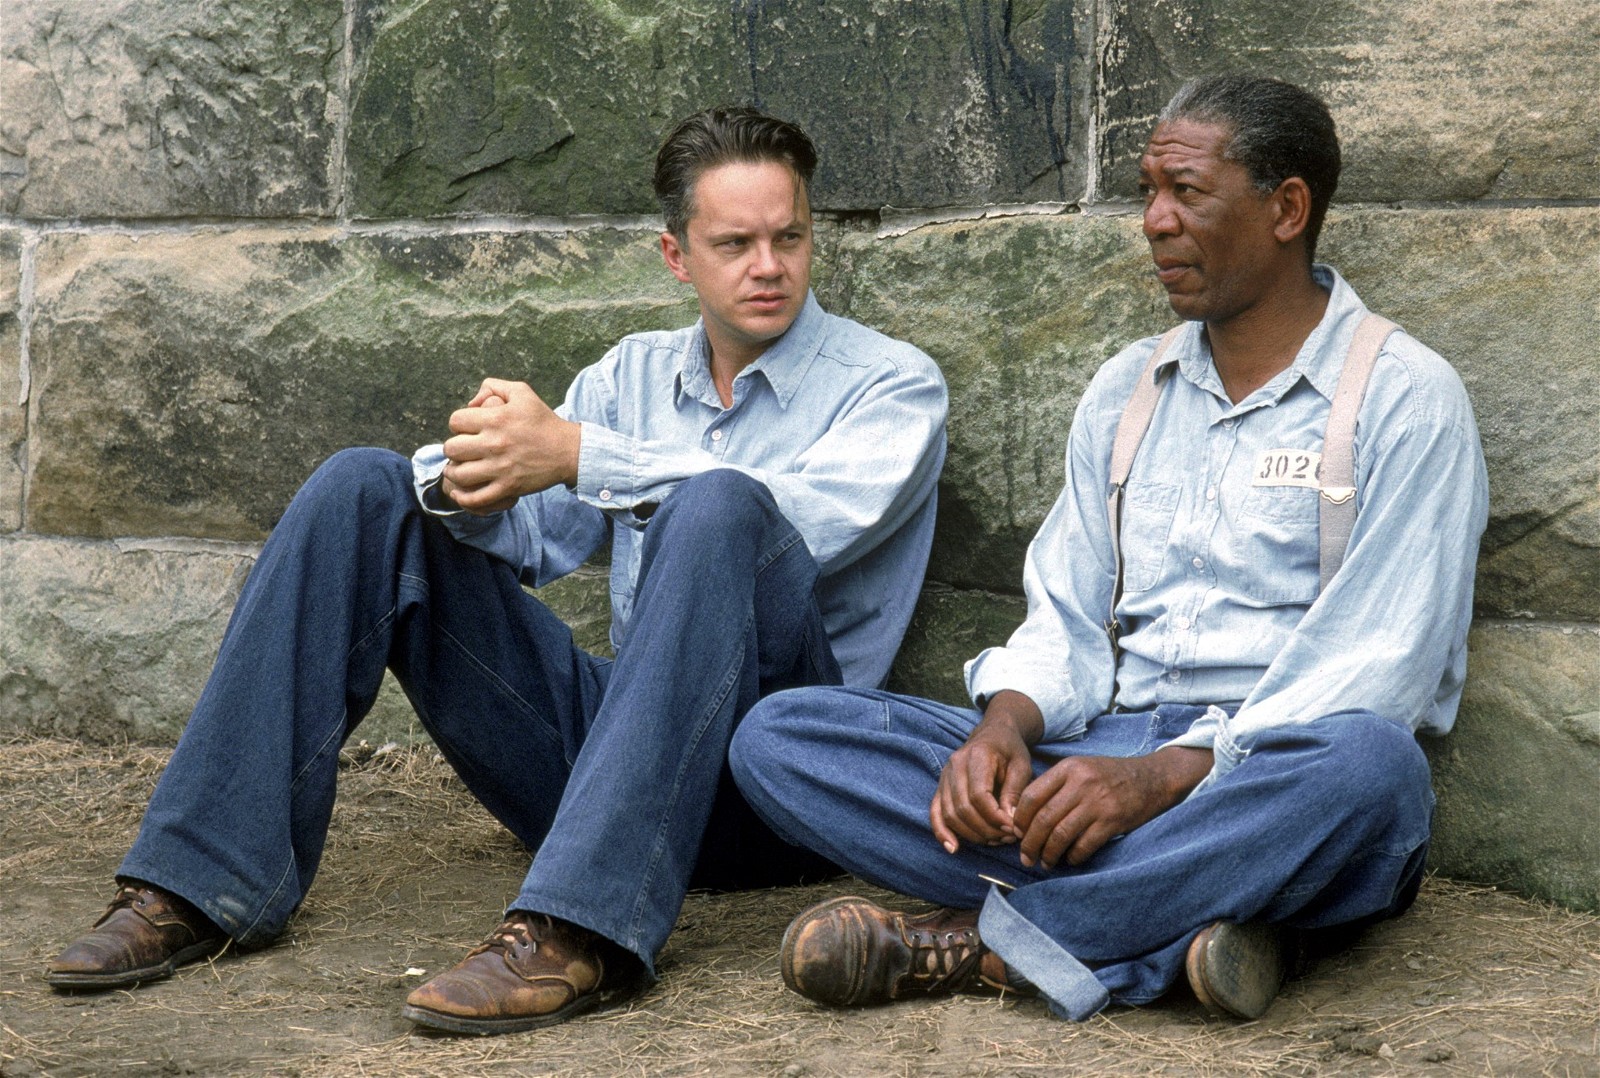 The Shawshank Redemption shockingly did not receive any Oscars